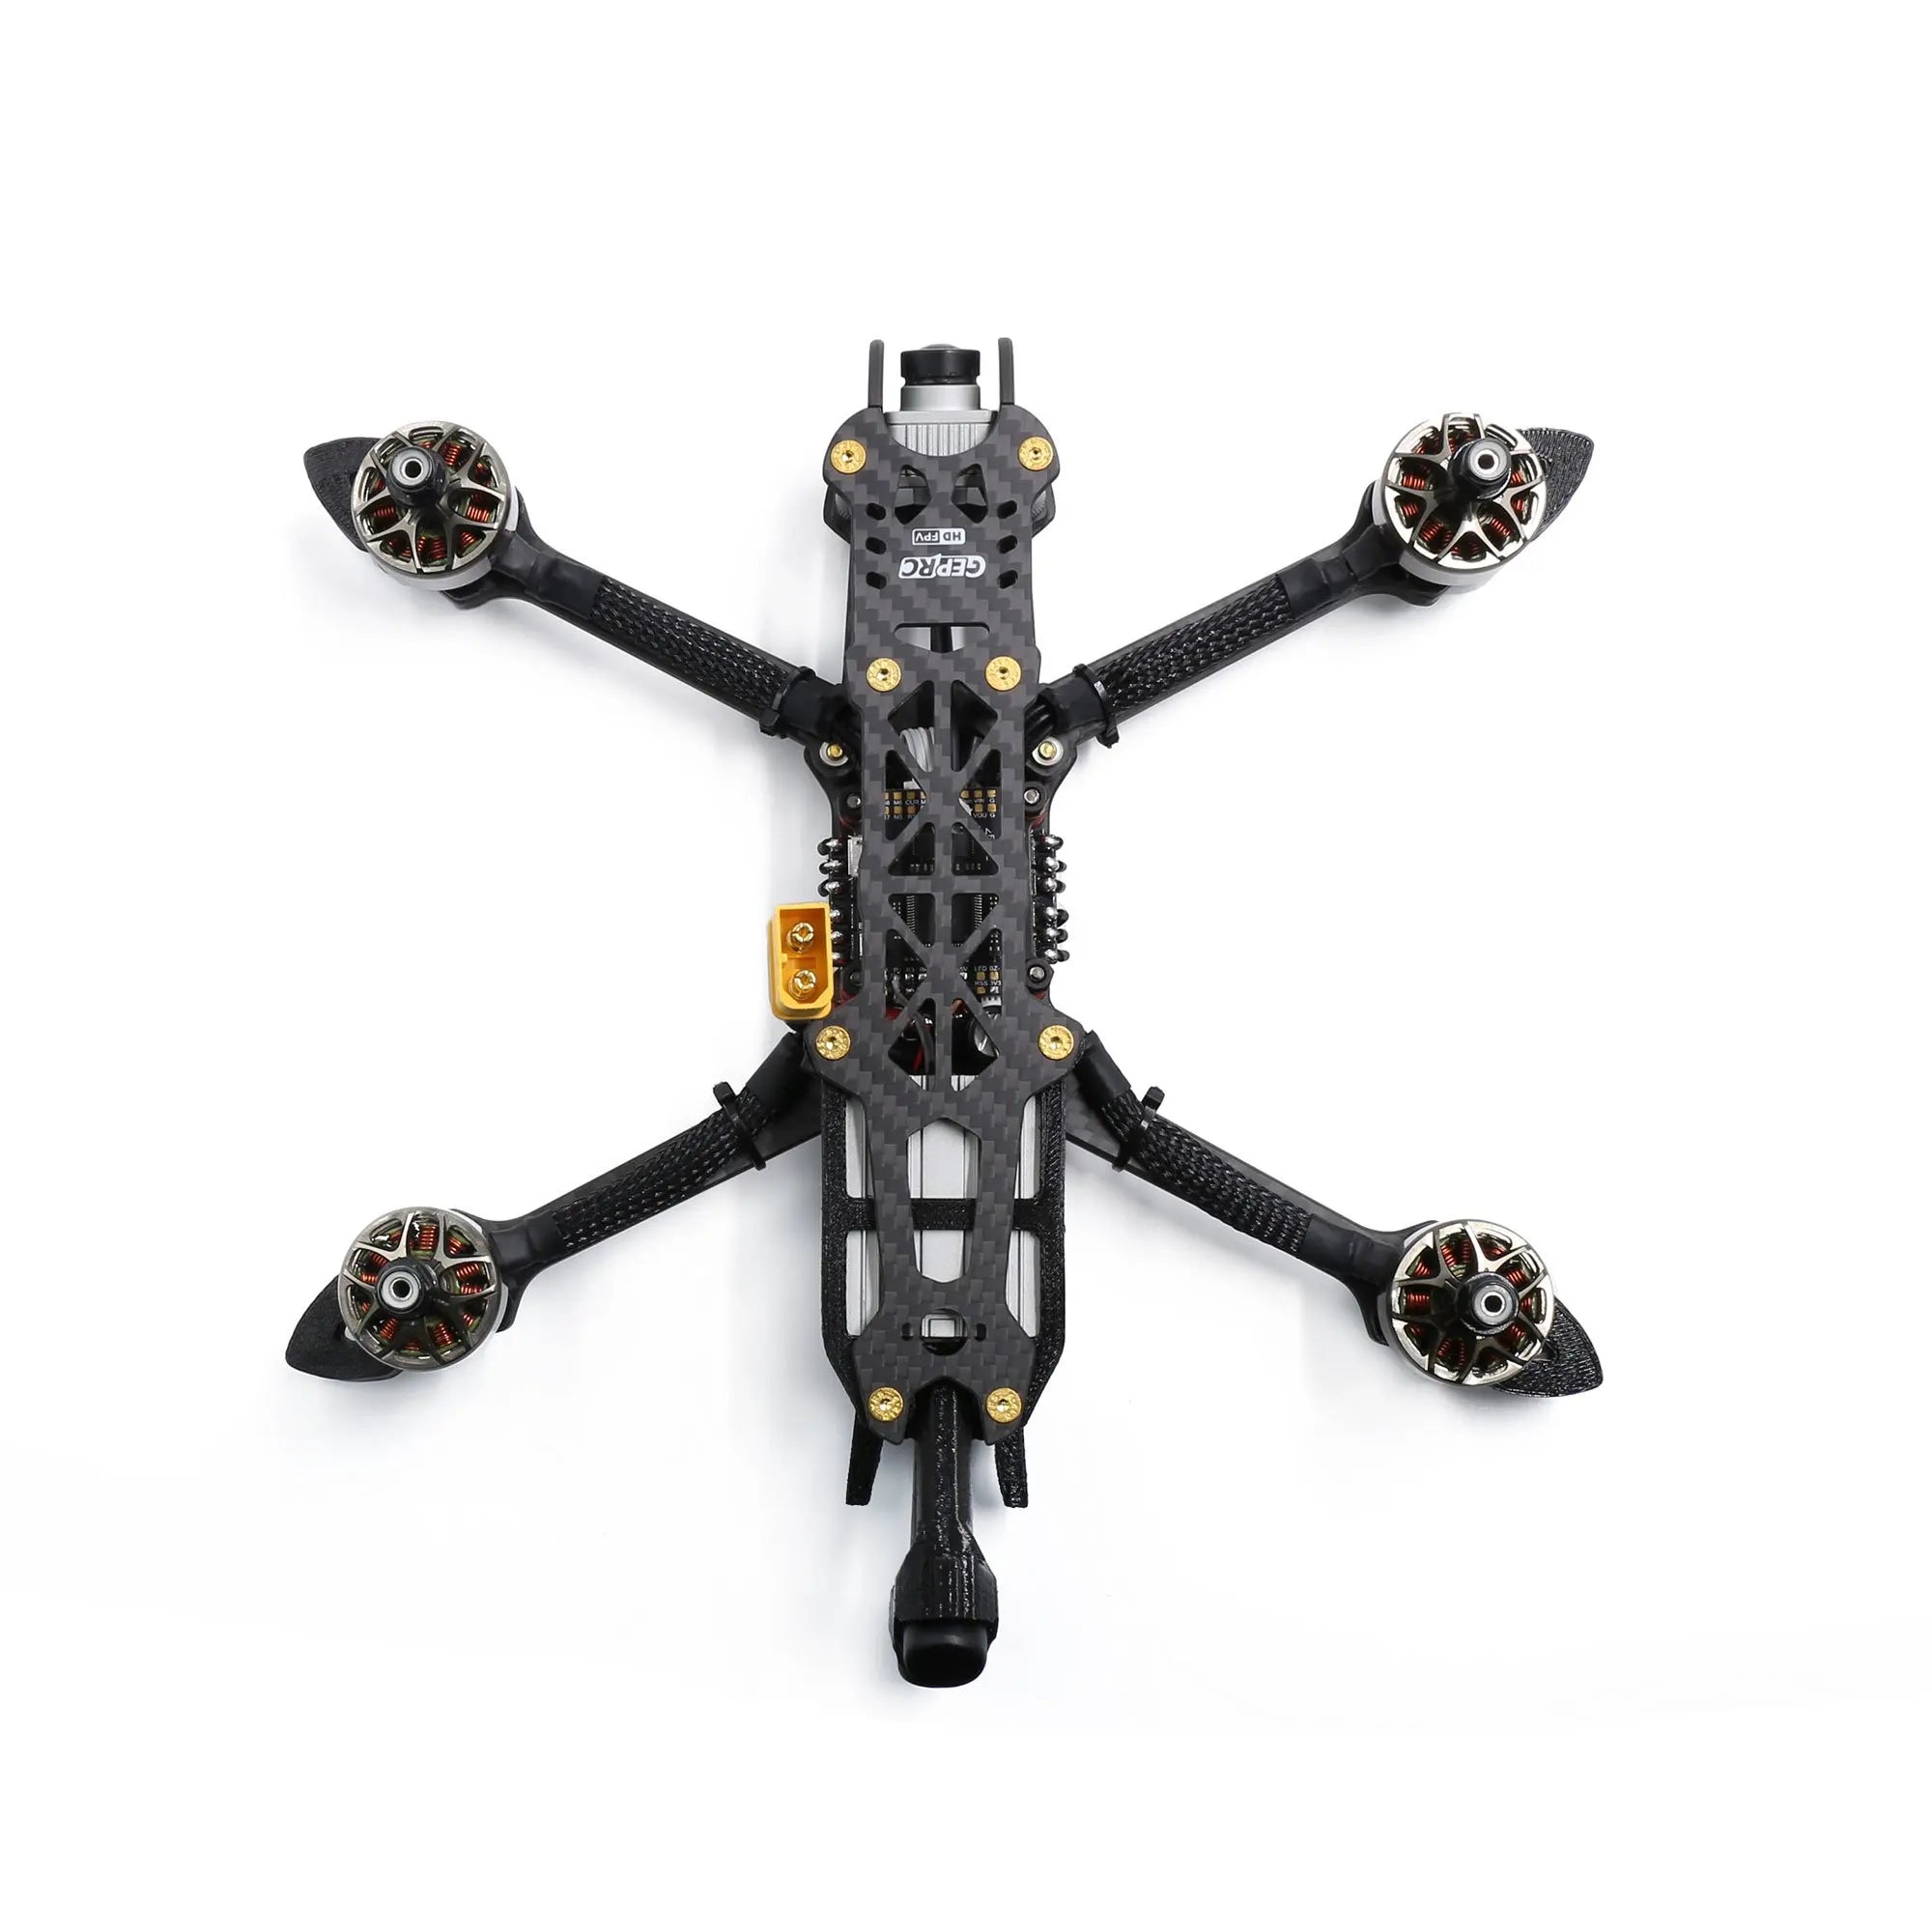 GEPRC MARK4 FPV Drone, Eliminates any potential installation problems.